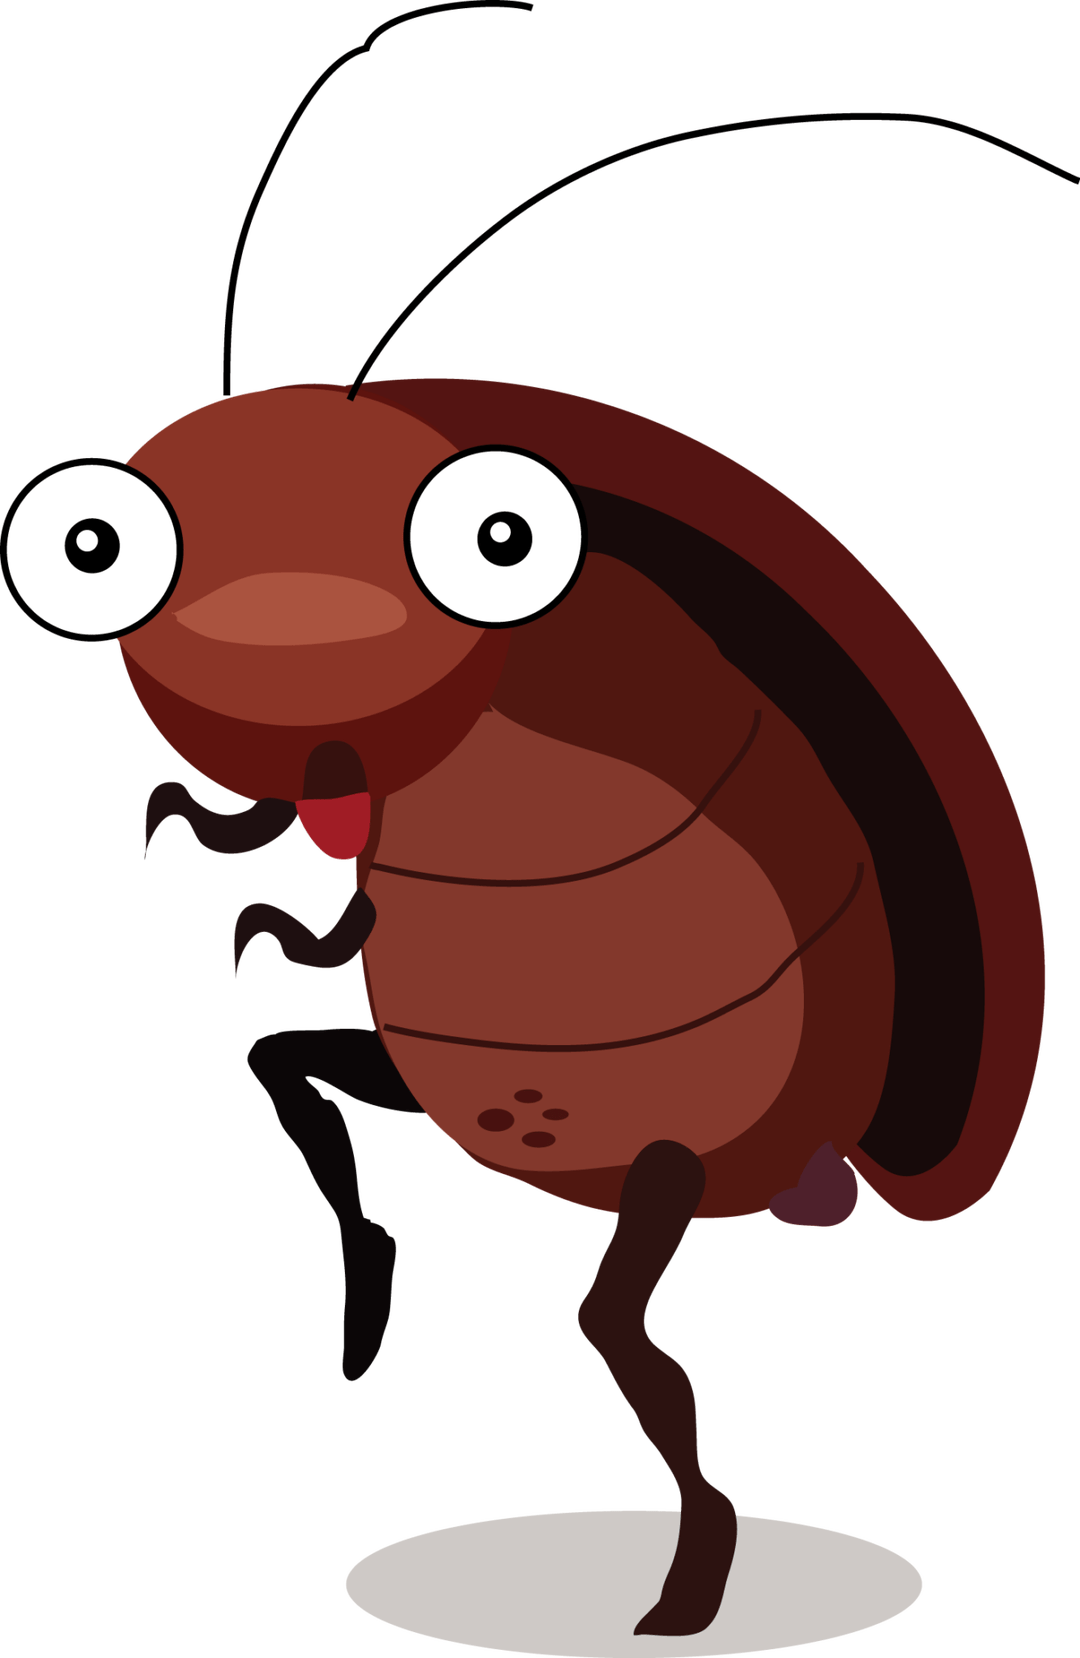 insects clipart garden creature